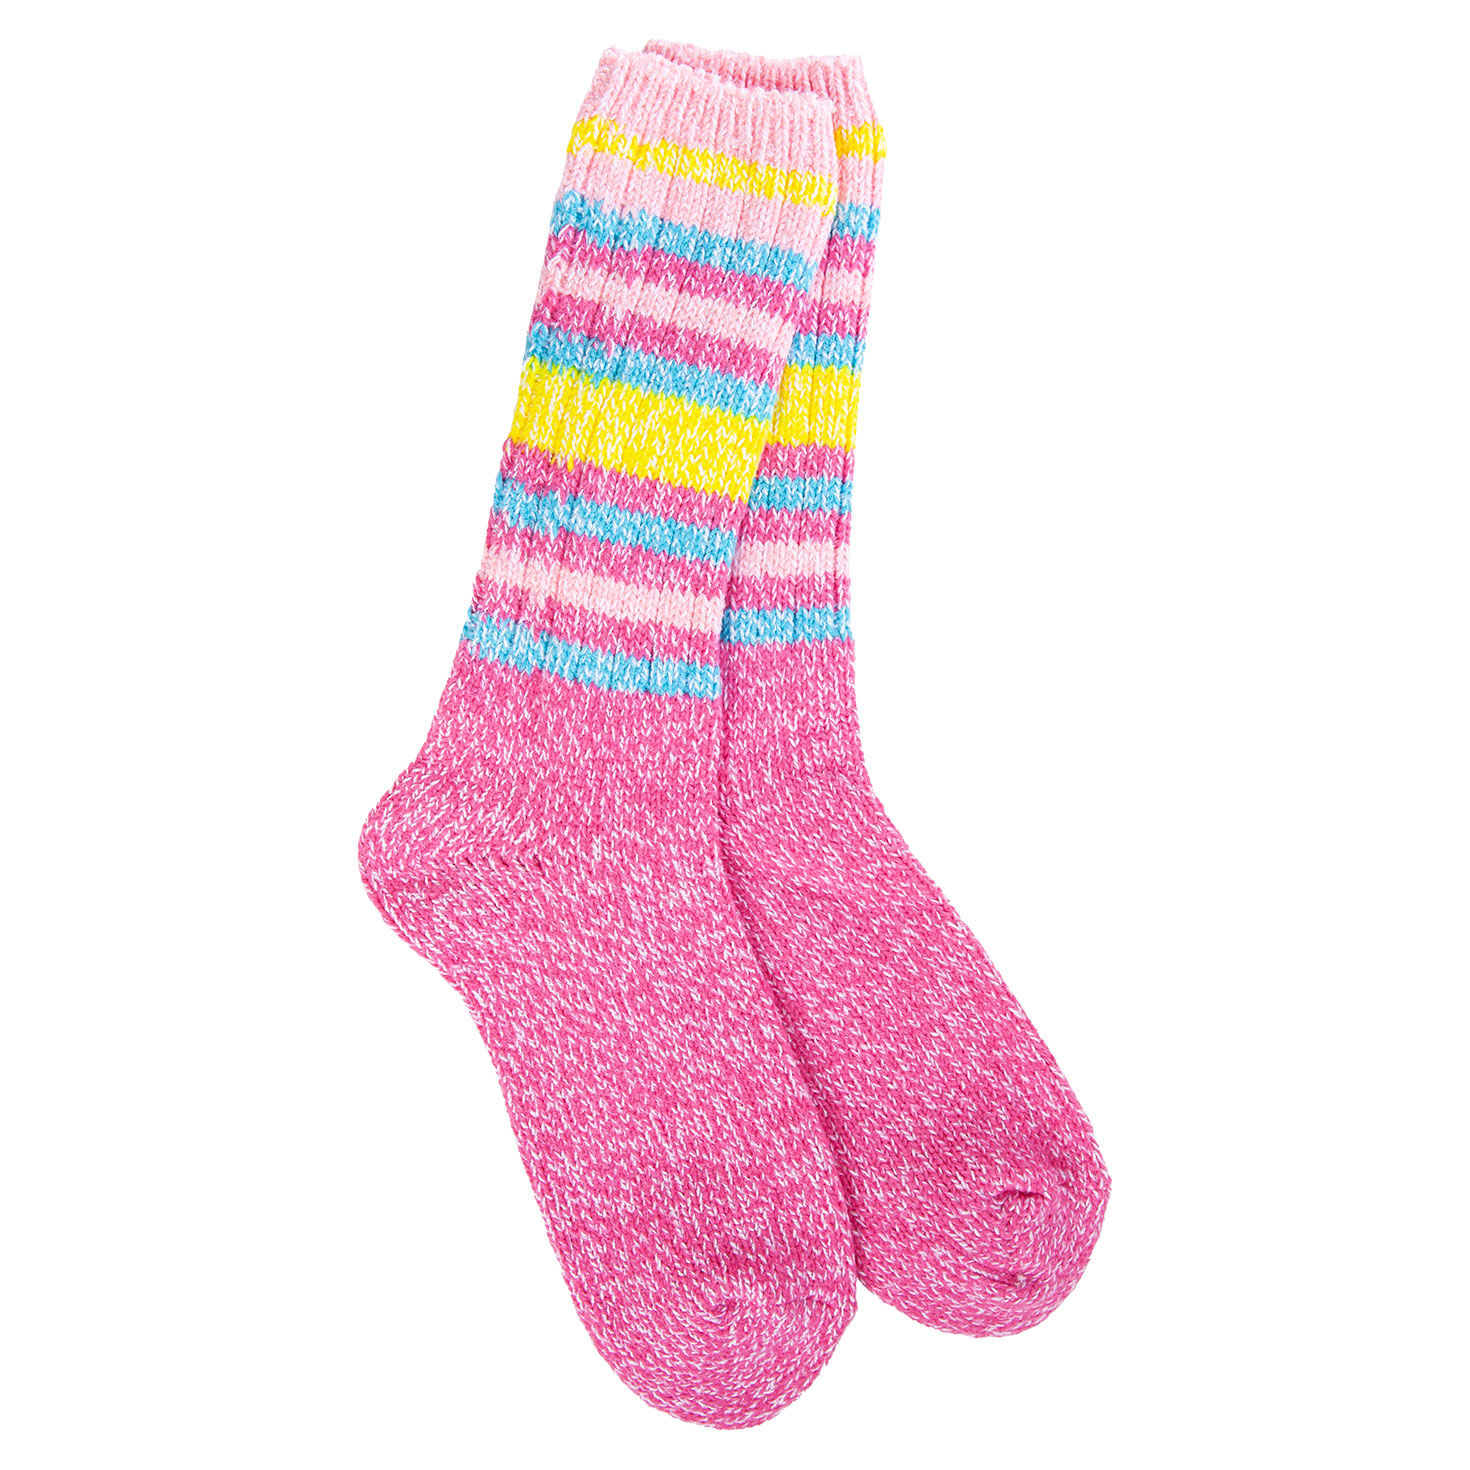 Crescent Sock Company Hot Pink Weekend Ragg Crew Socks for only USD 12.99 | Hallmark